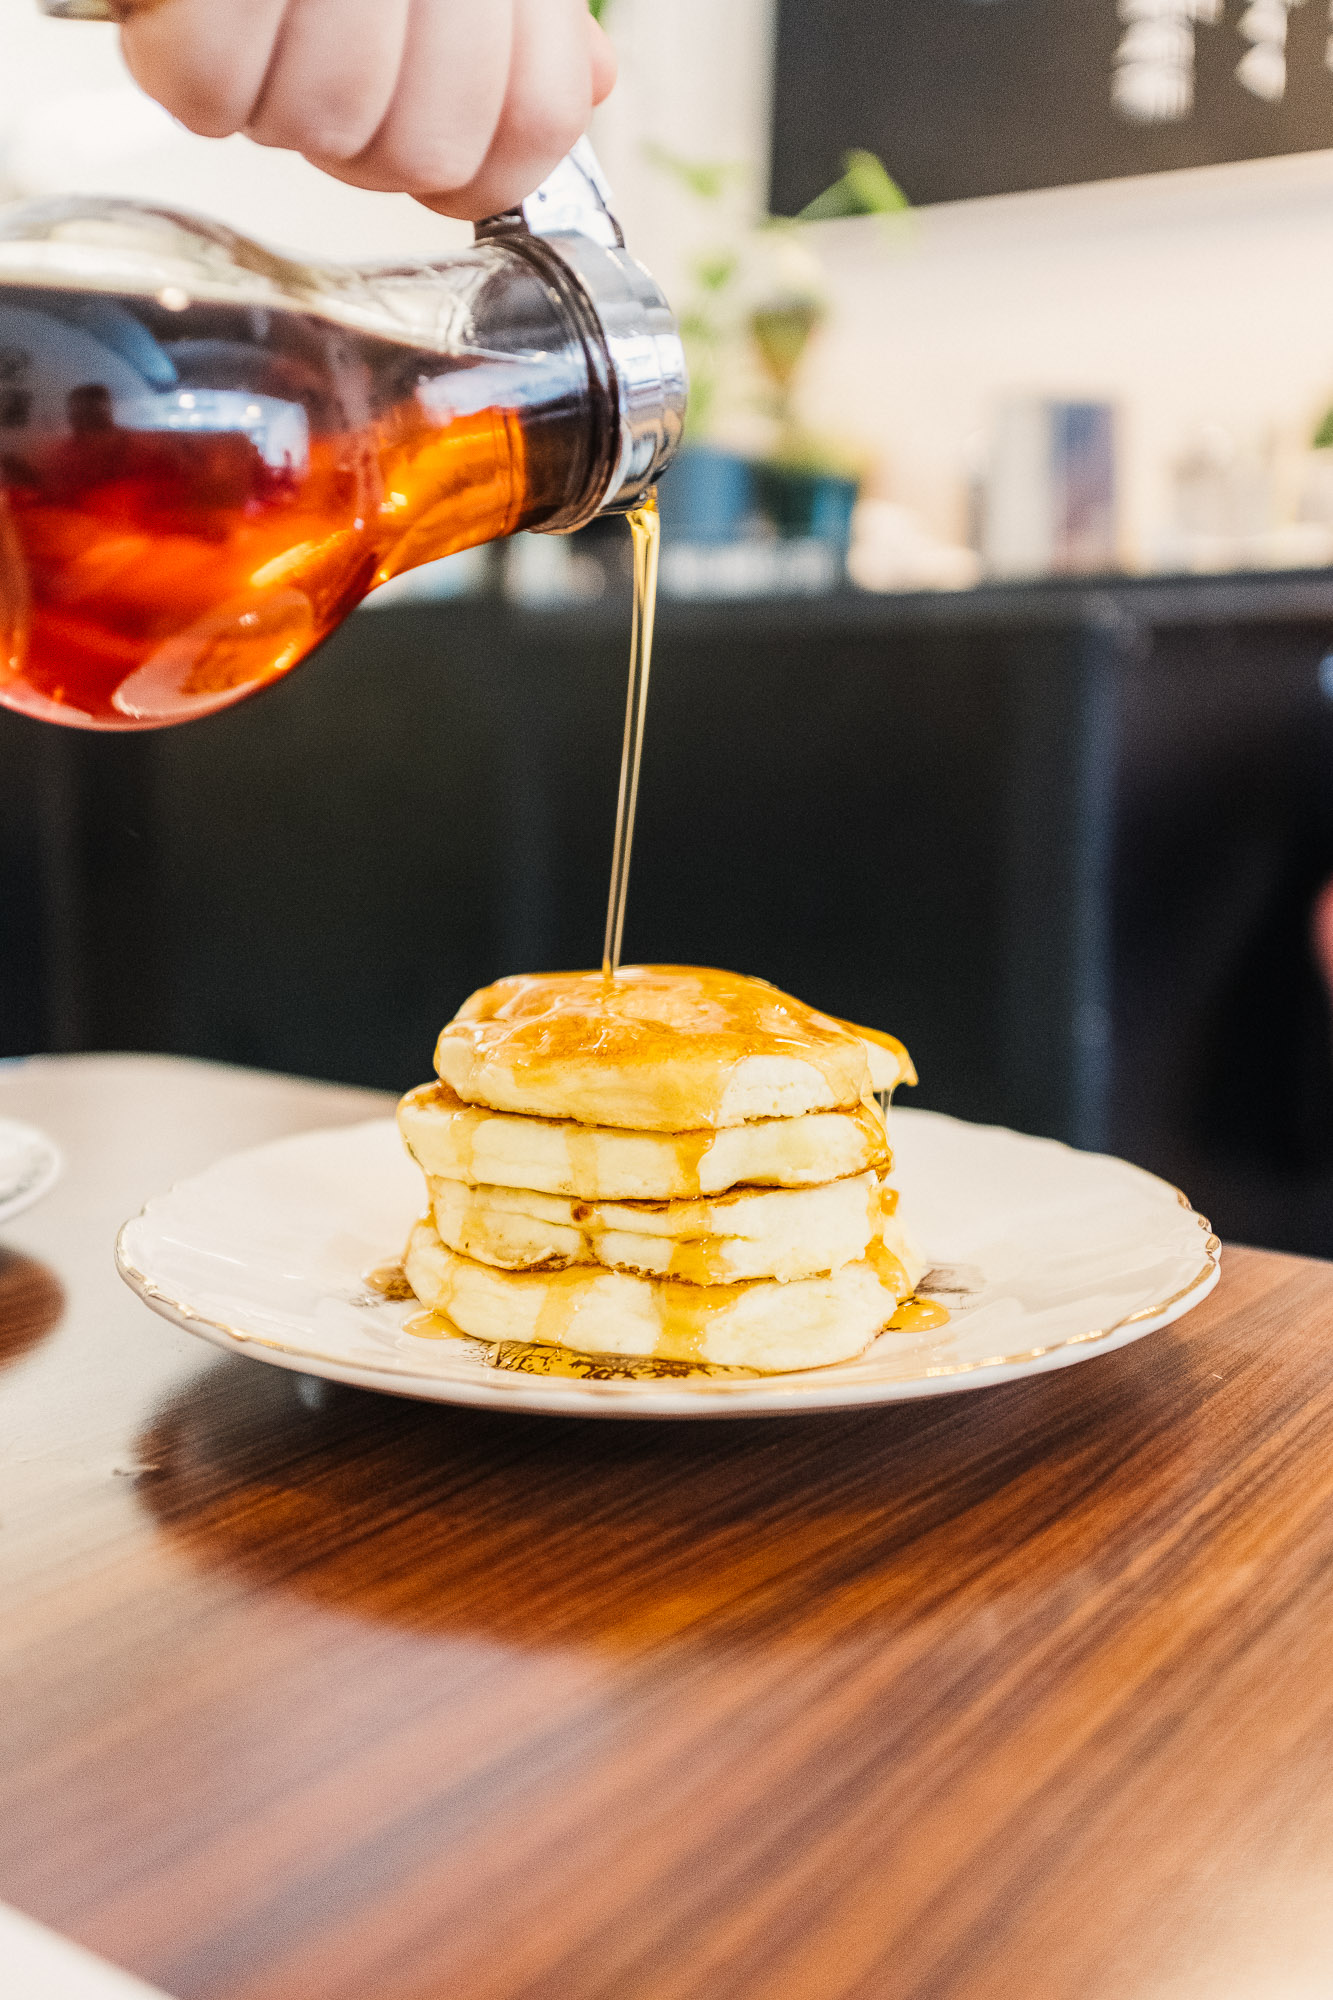 Fluffy pancakes and syrup at Millmans Restaurant - Verdun - Montreal